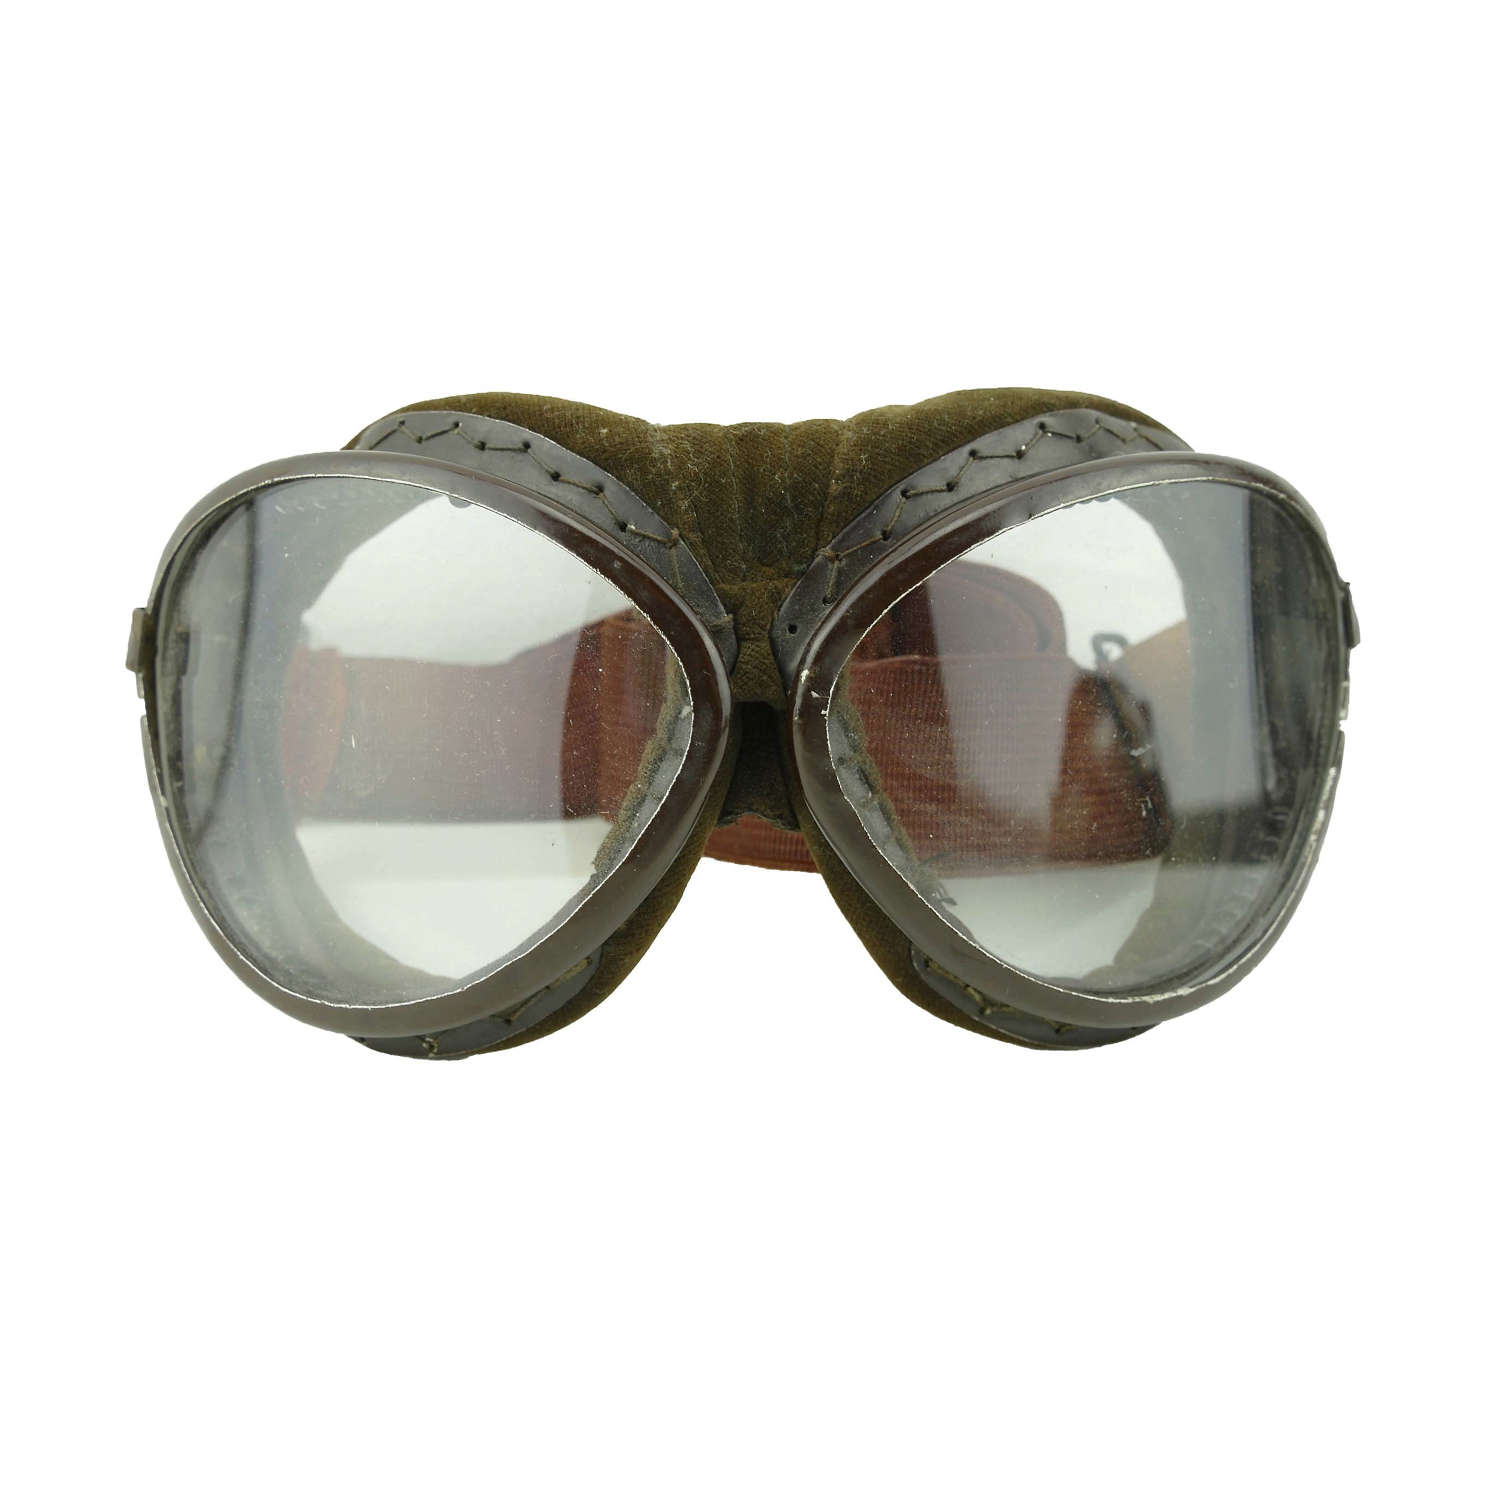 Imperial Japanese Army/Navy flying goggles